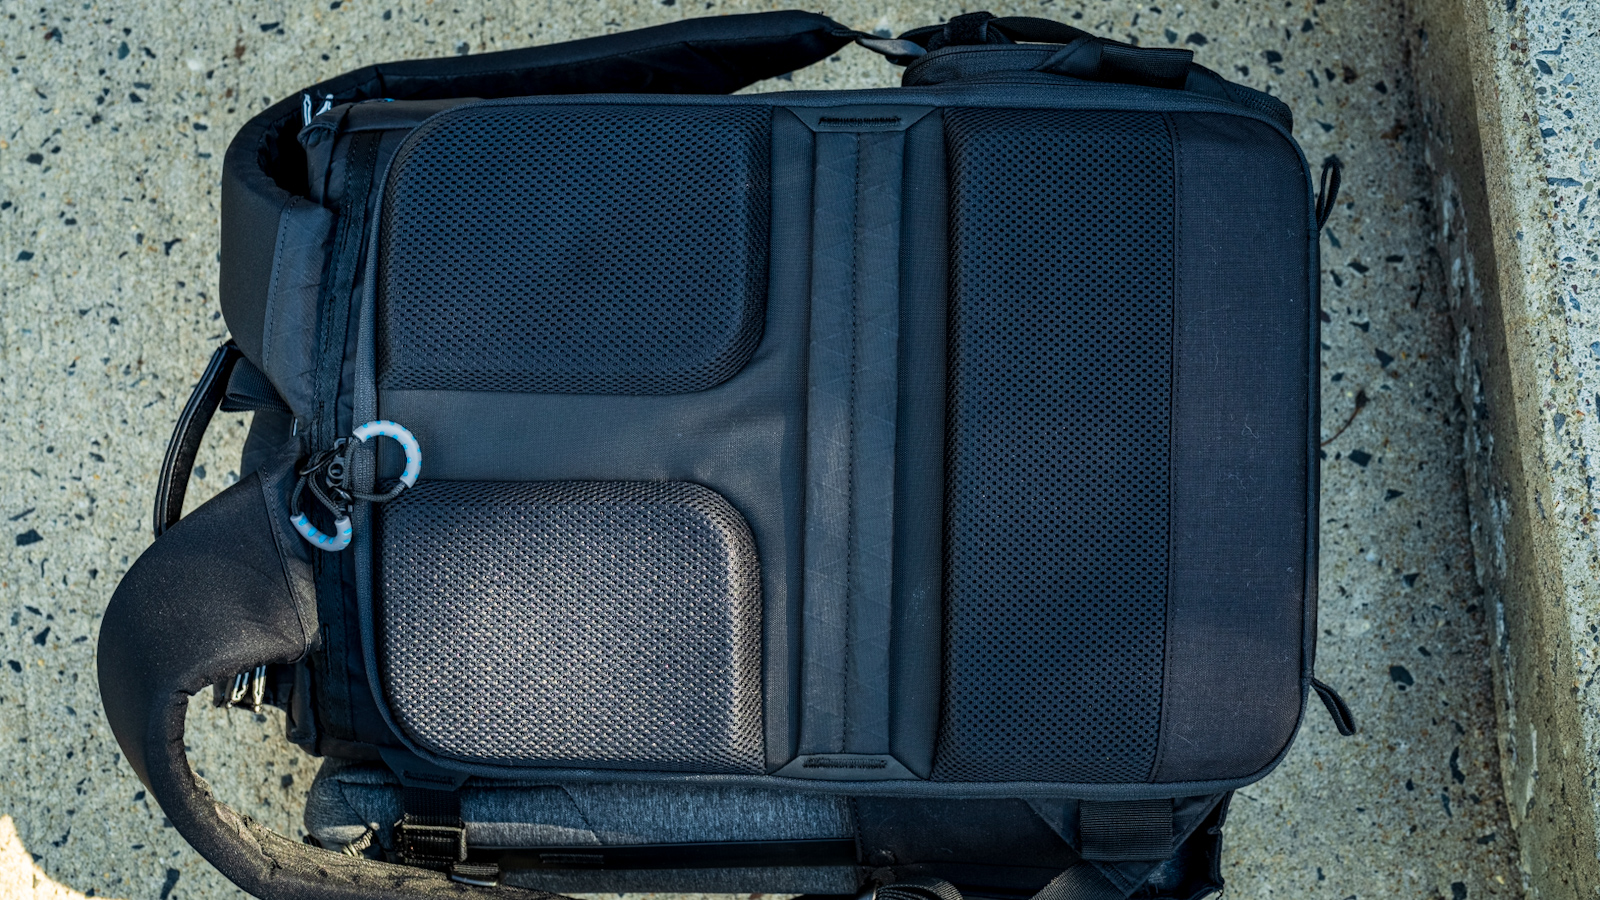 Gura Gear Launches Their First Roll-Top: The Kiboko City Commuter 18L+